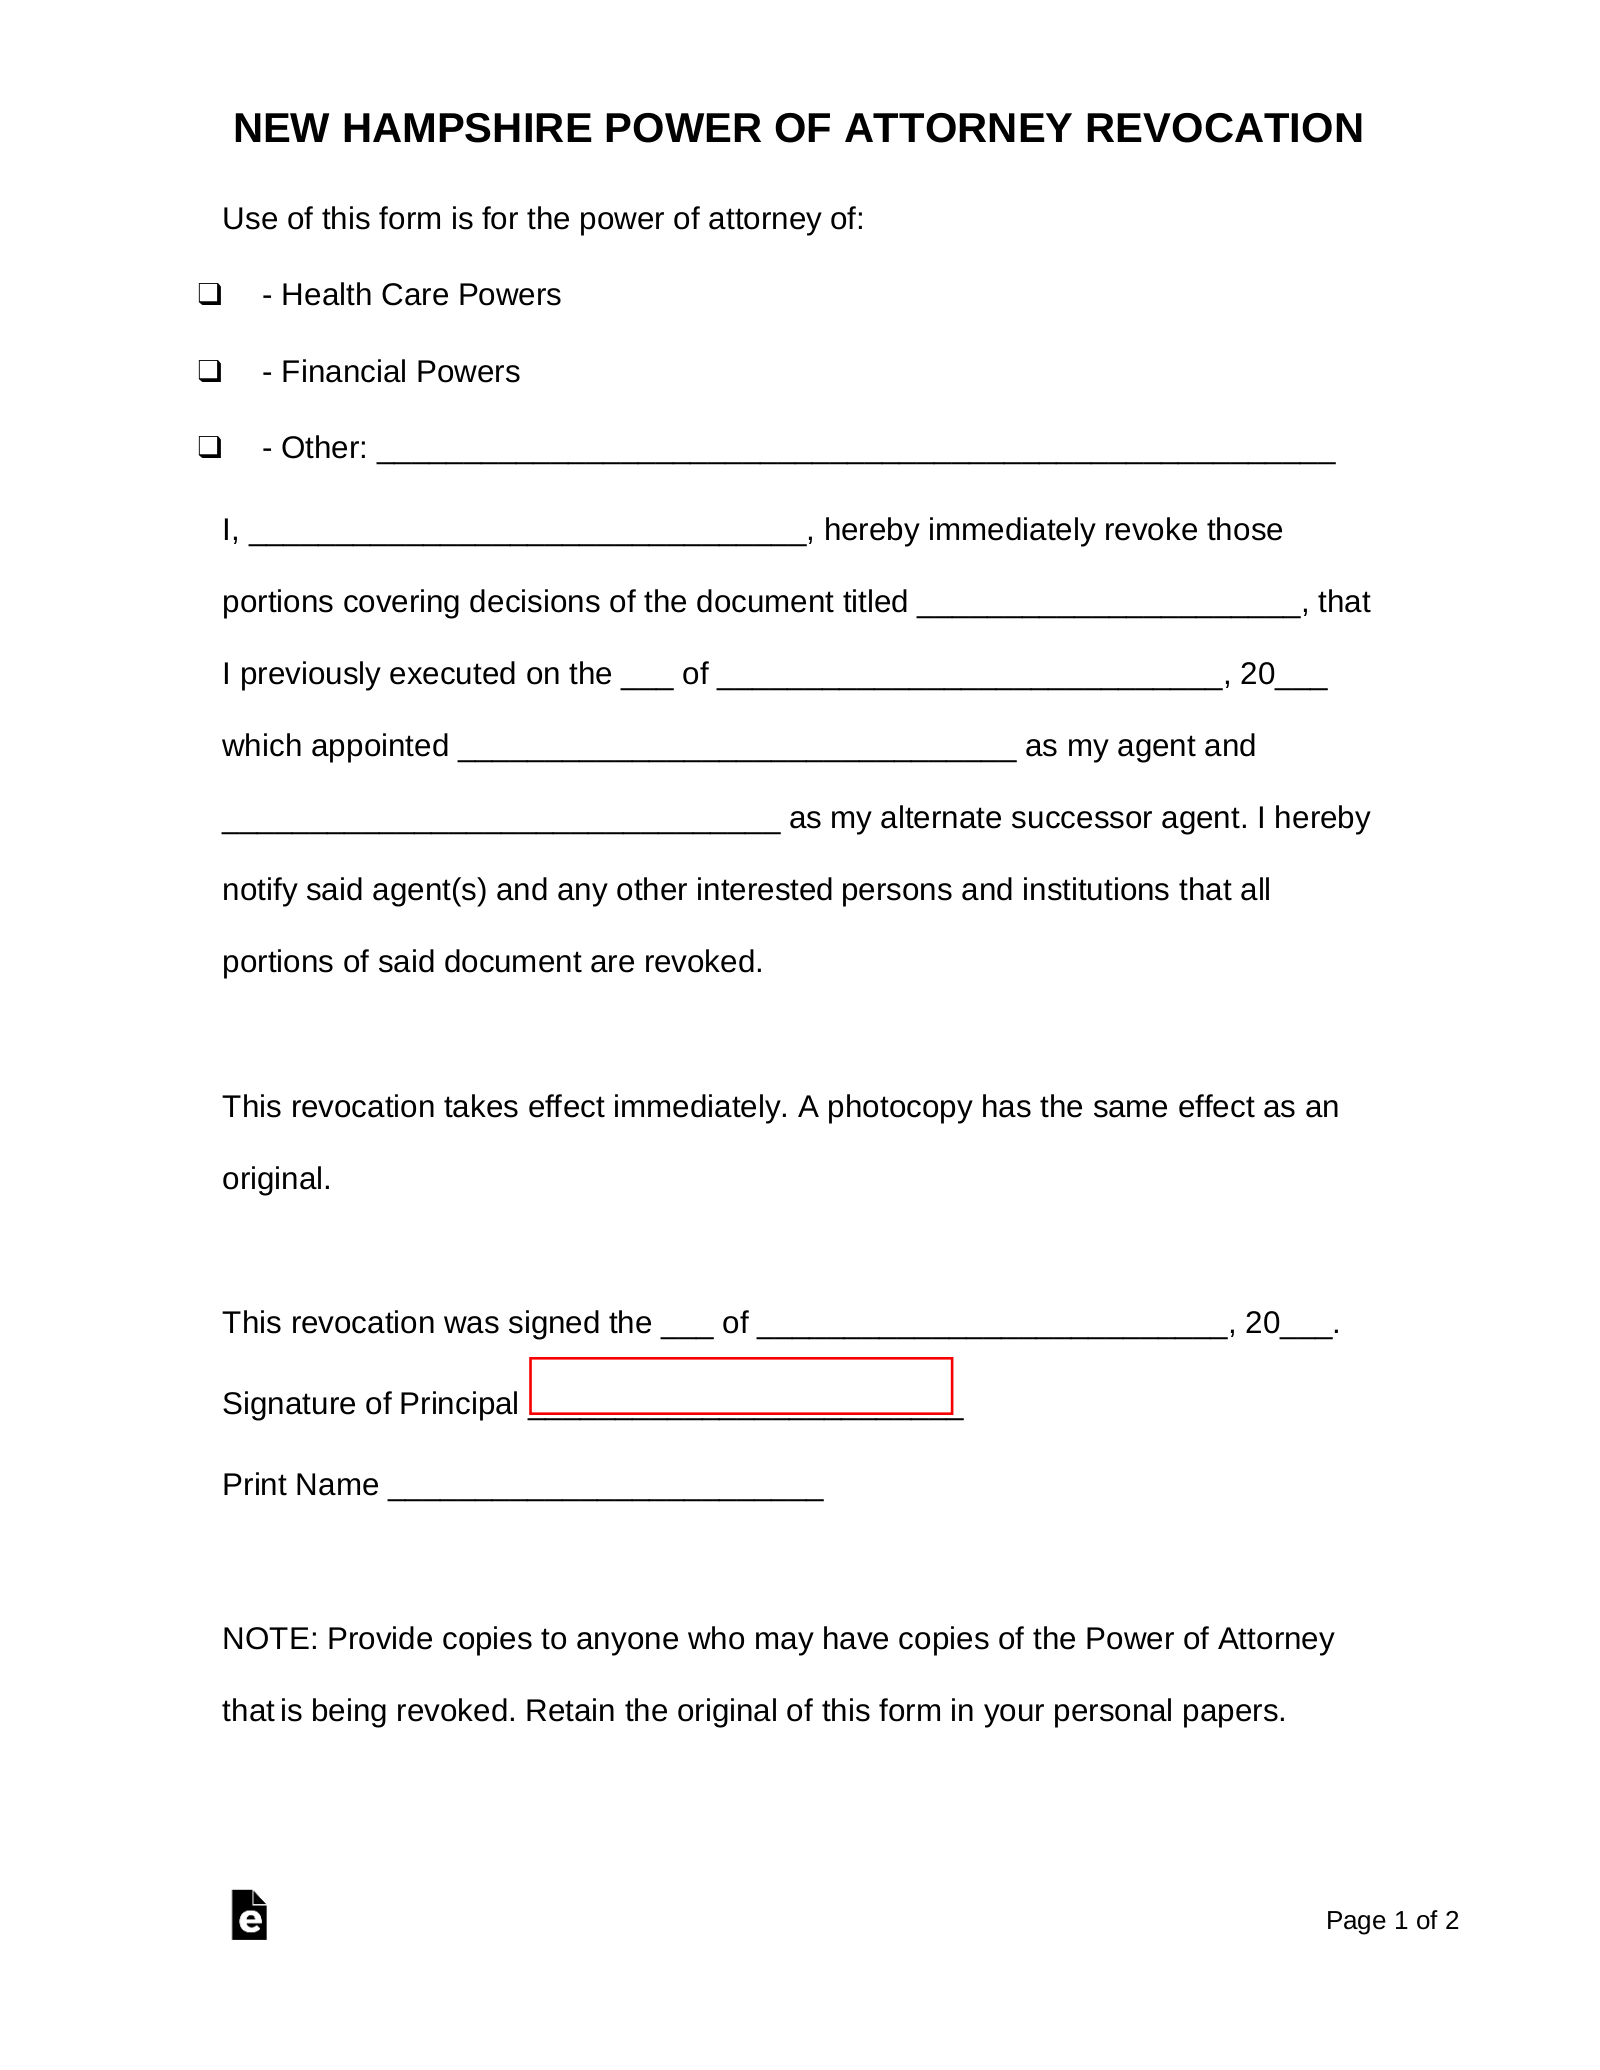 New Hampshire Revocation Power of Attorney Form